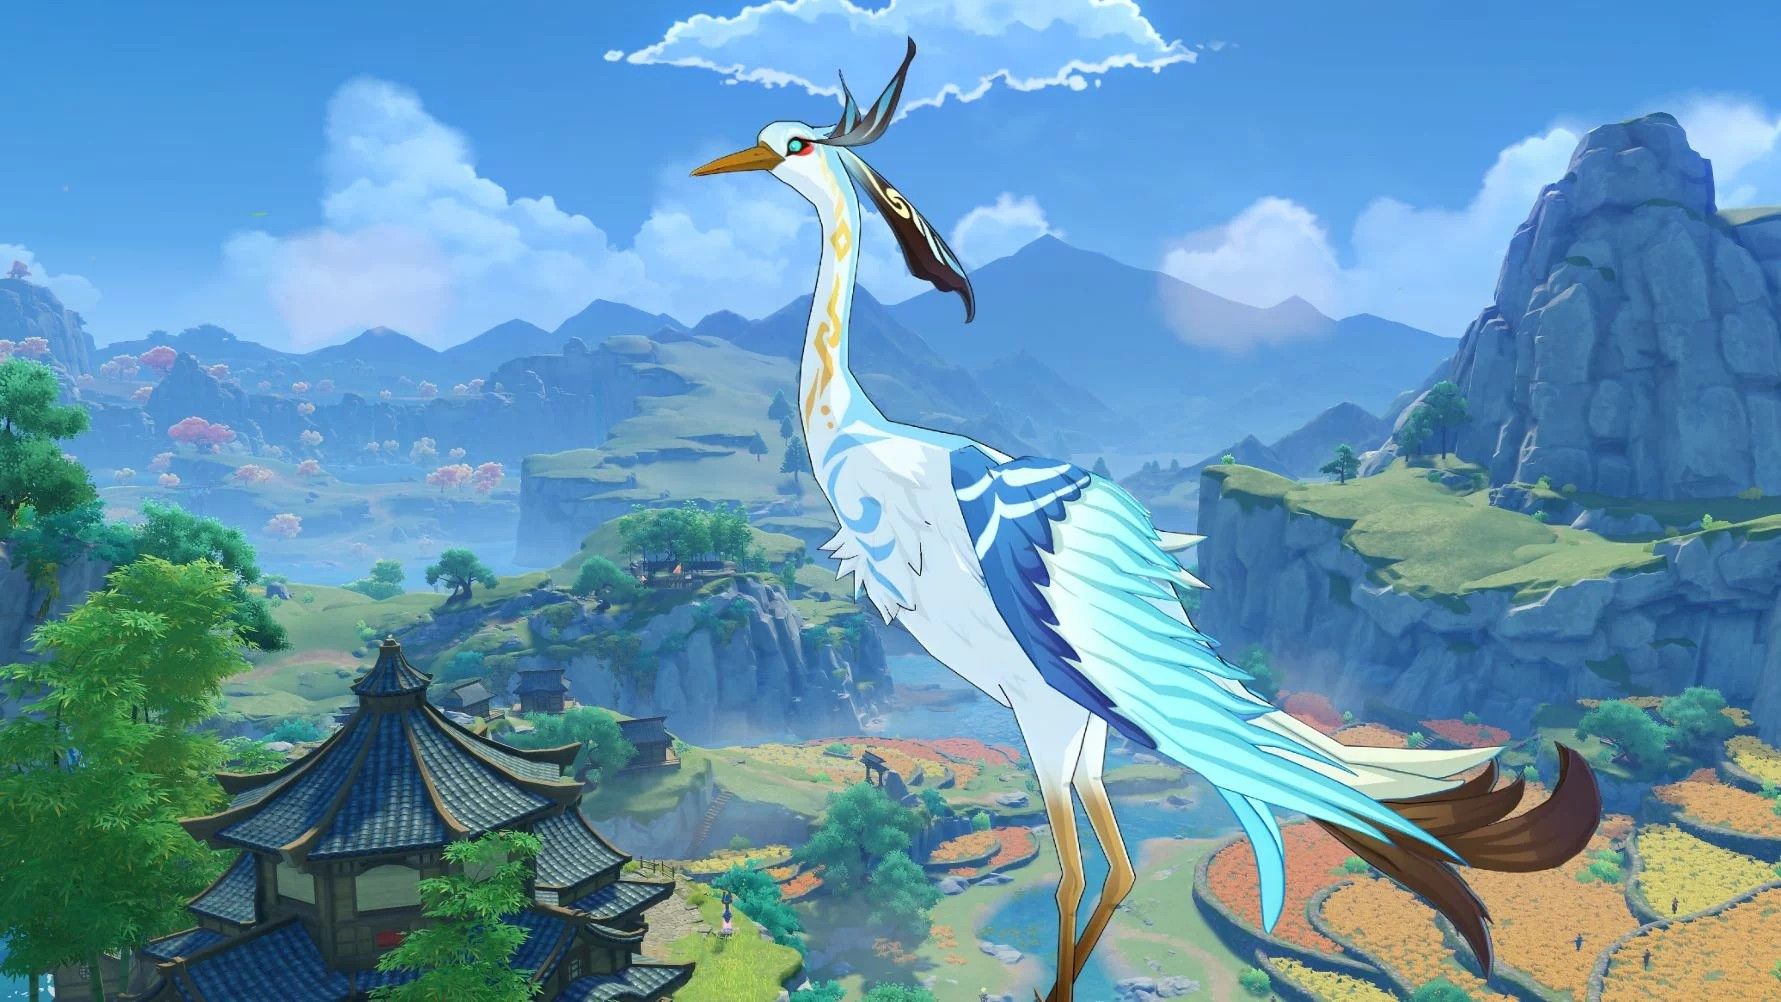 Cloud Retainer's crane form in Genshin Impact, overseeing the Liyue landscape.